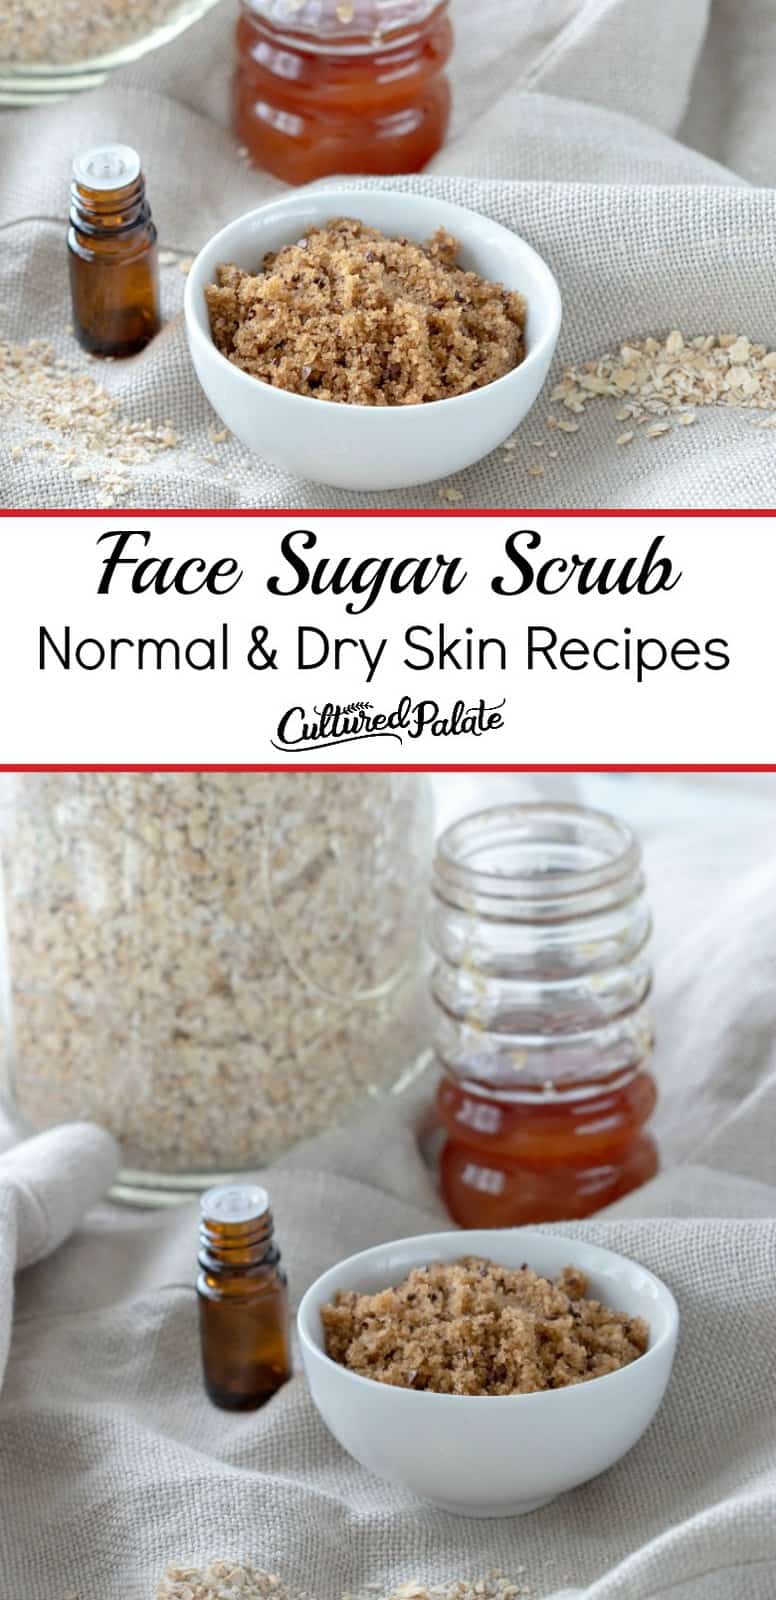 Face sugar scrub recipe shown in white bowl on linen cloth with honey and oats. Two images with text overlay.